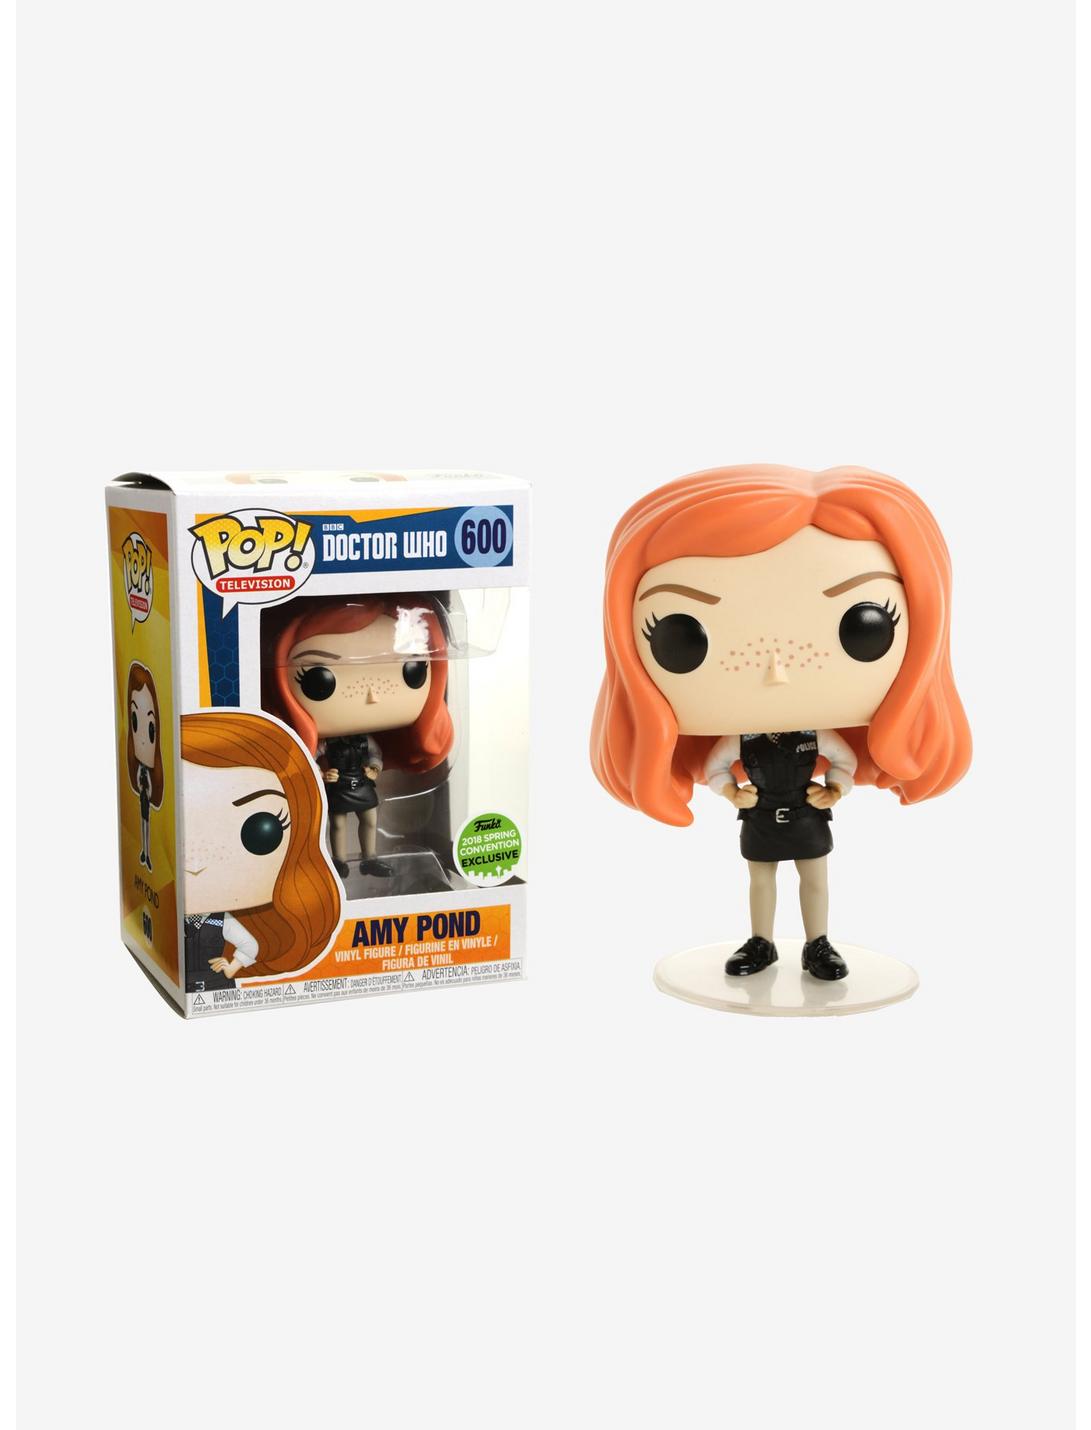 Funko Doctor Who Pop! Television Amy Pond Vinyl Figure 2018 Spring Convention Exclusive, , hi-res